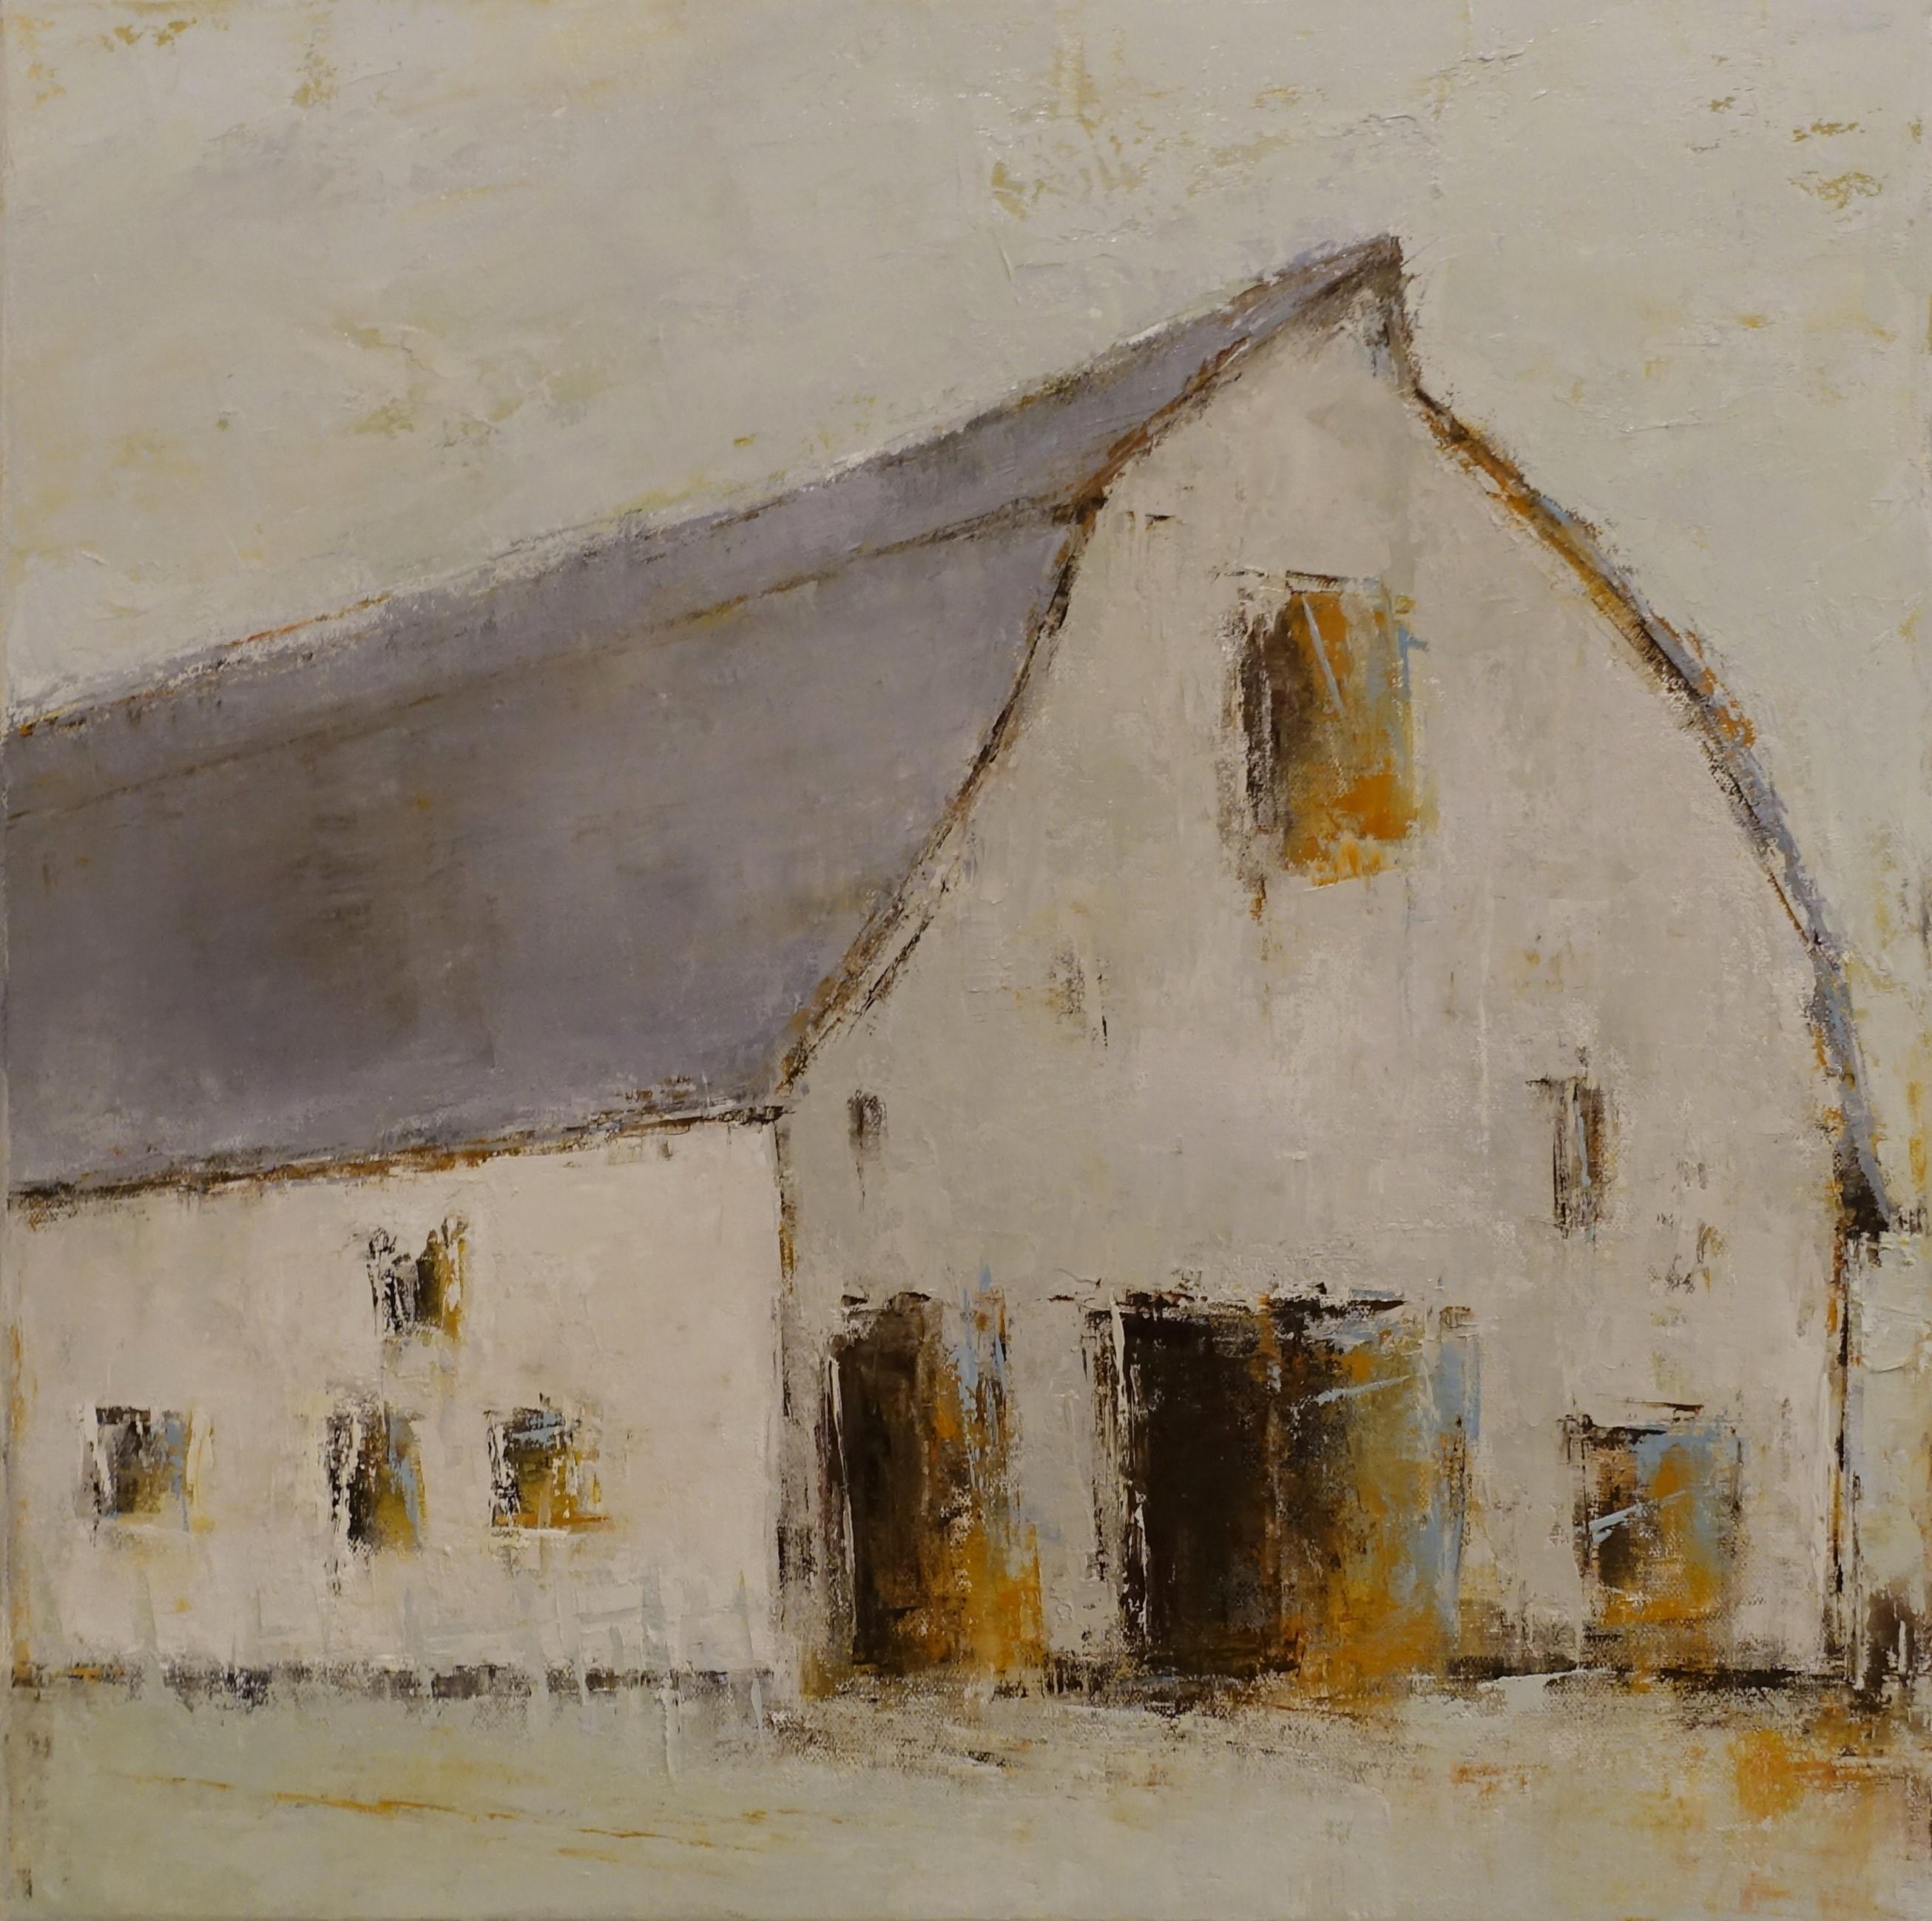 'Forgotten Barn I' is a medium size framed oil on canvas Impressionist painting created by American artist Geri Eubanks in 2019. Featuring a soft palette made of white, grey, light blue and brown tones, the painting depicts in close view a large